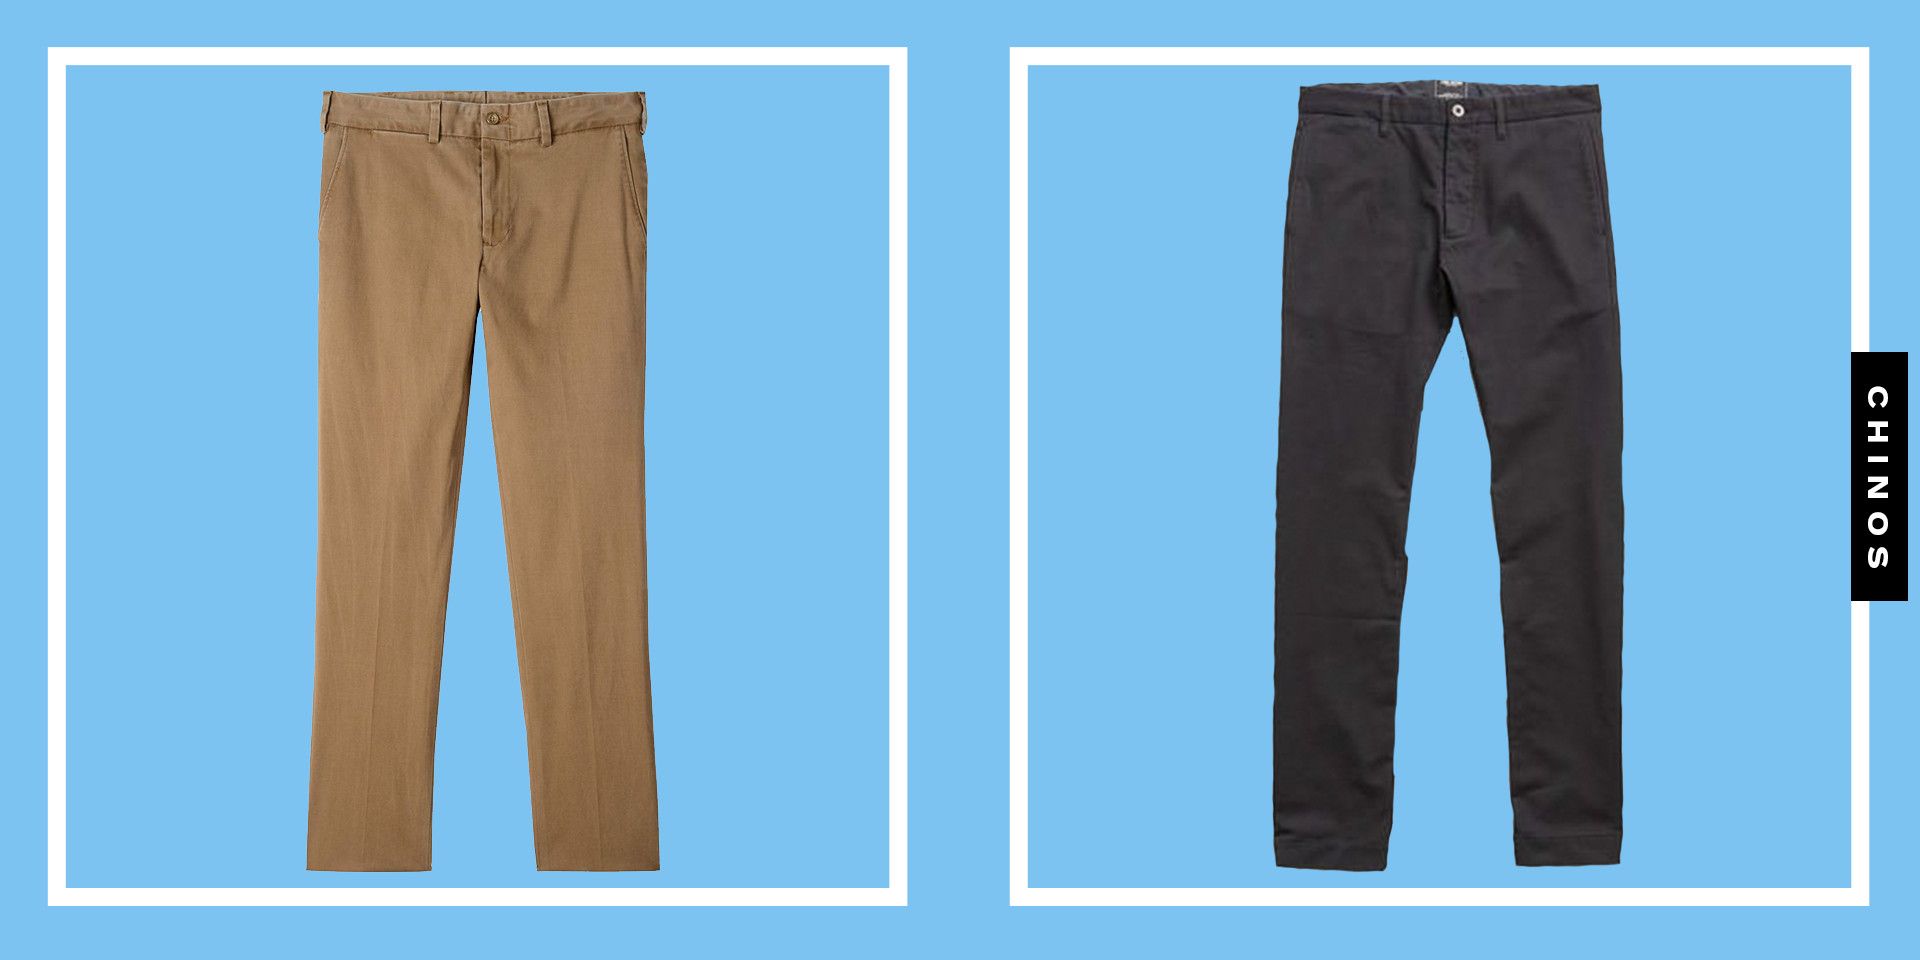 Chinos vs Jeans - Which Are Better To Wear?